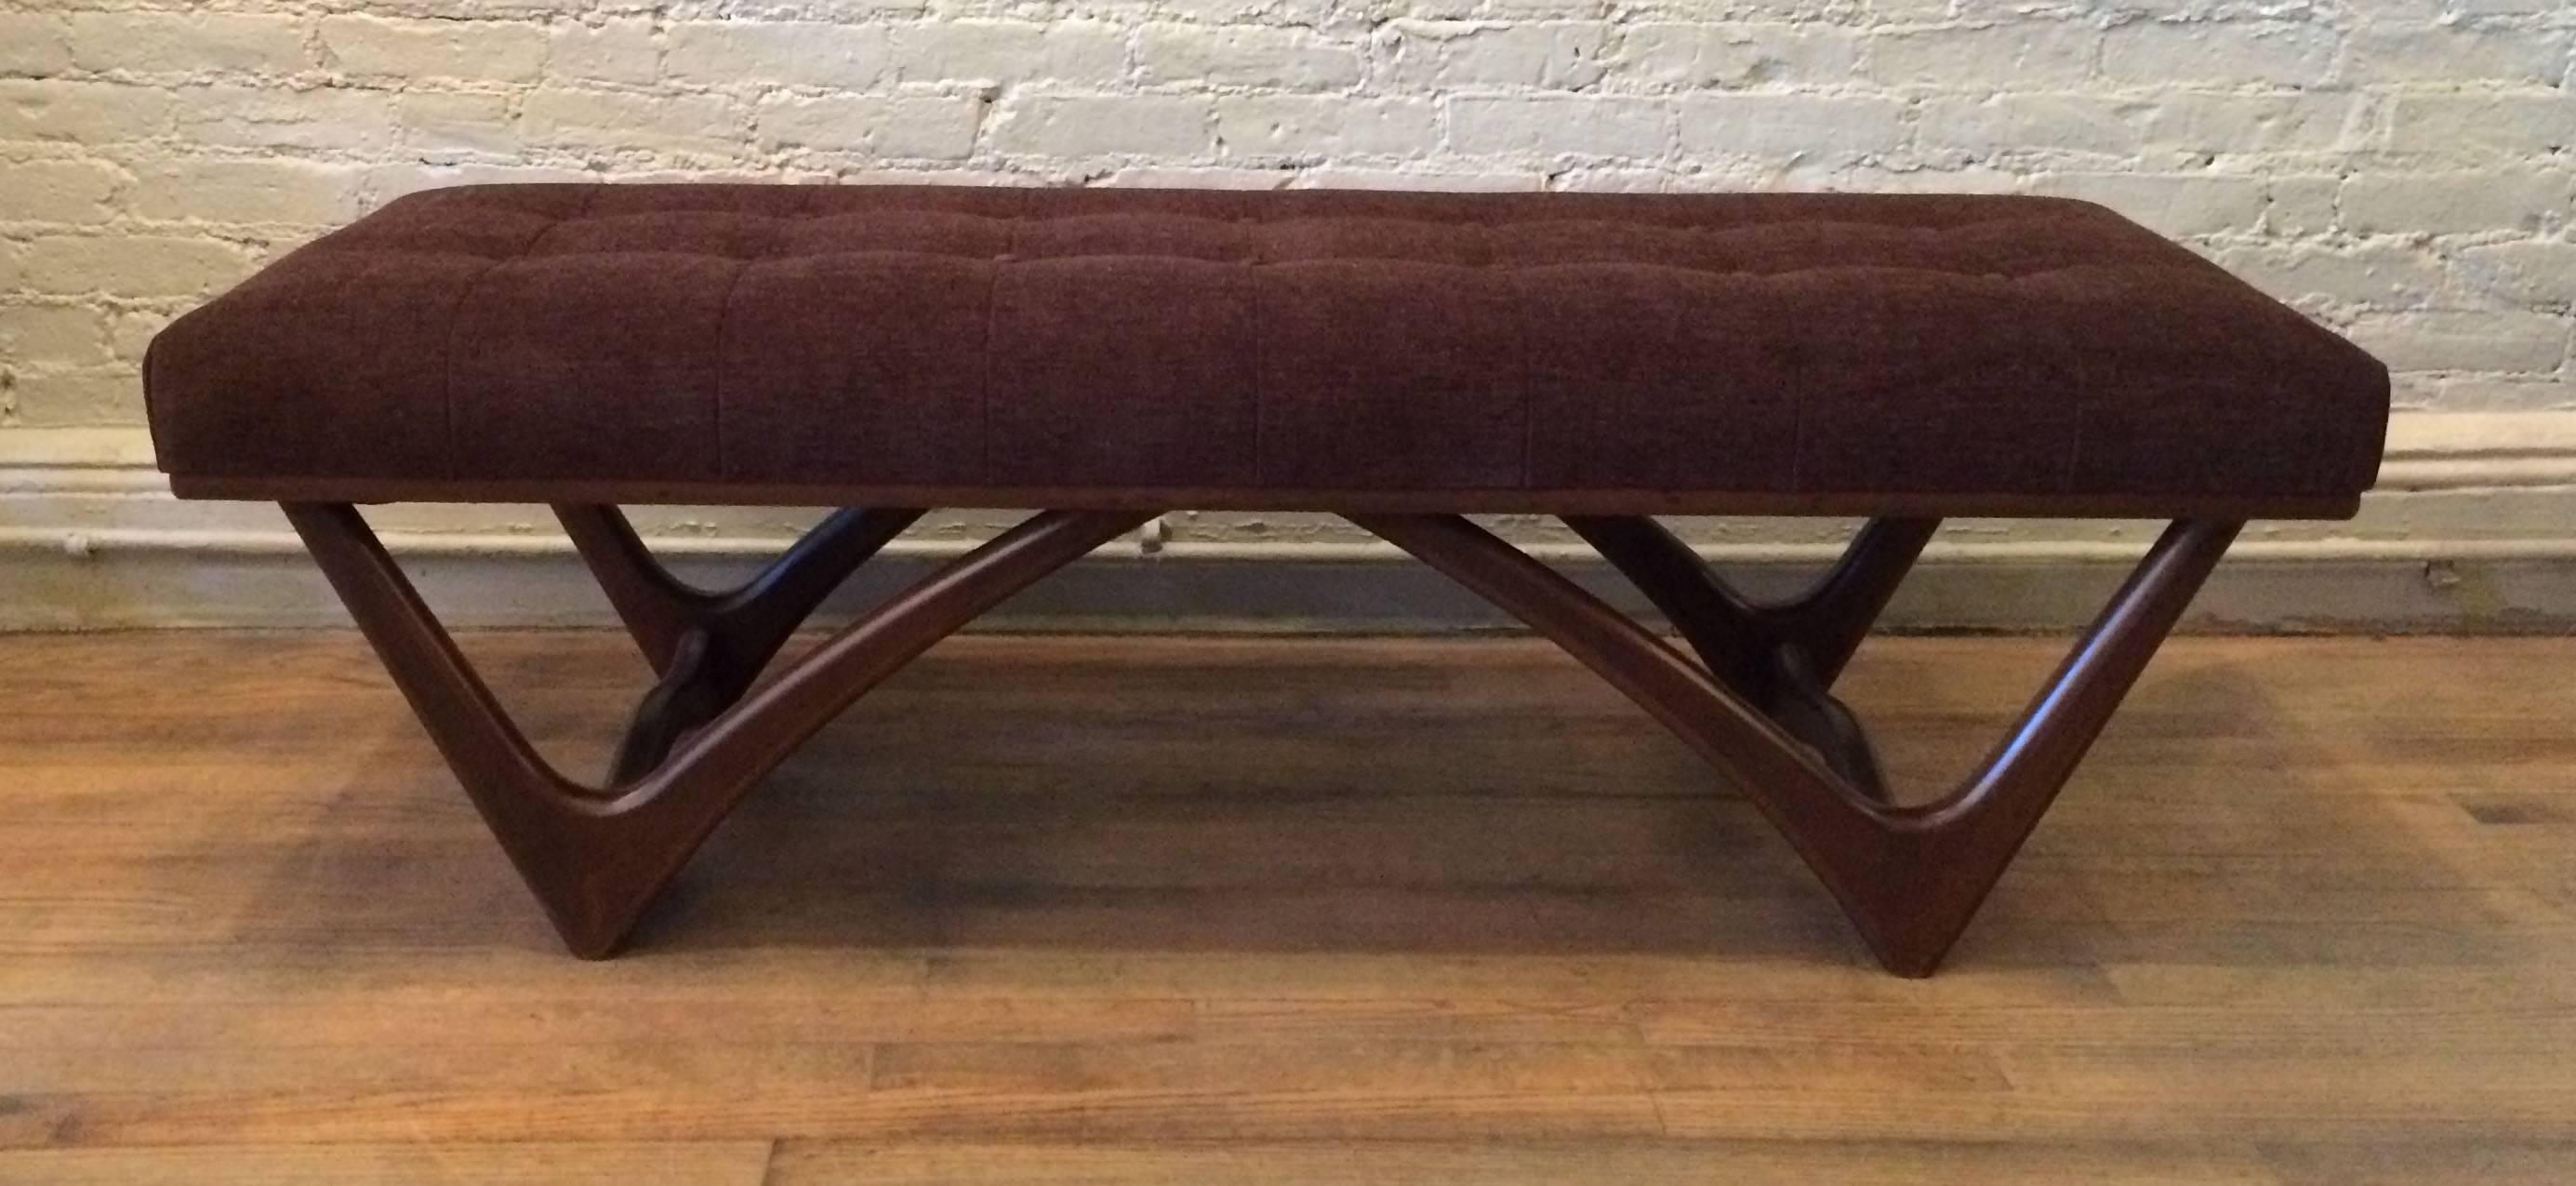 Mid-Century Modern bench in the style of Adrian Pearsall with sculpted walnut base and button upholstered seat in a rich chocolate brown chenille.